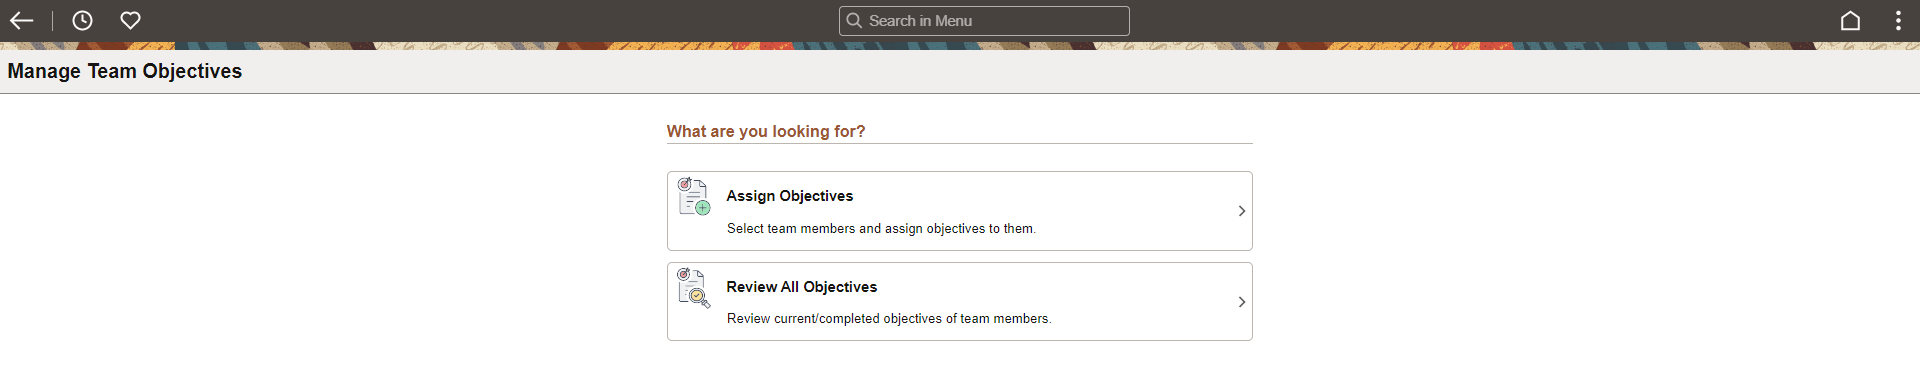 Manage Team Objectives home page